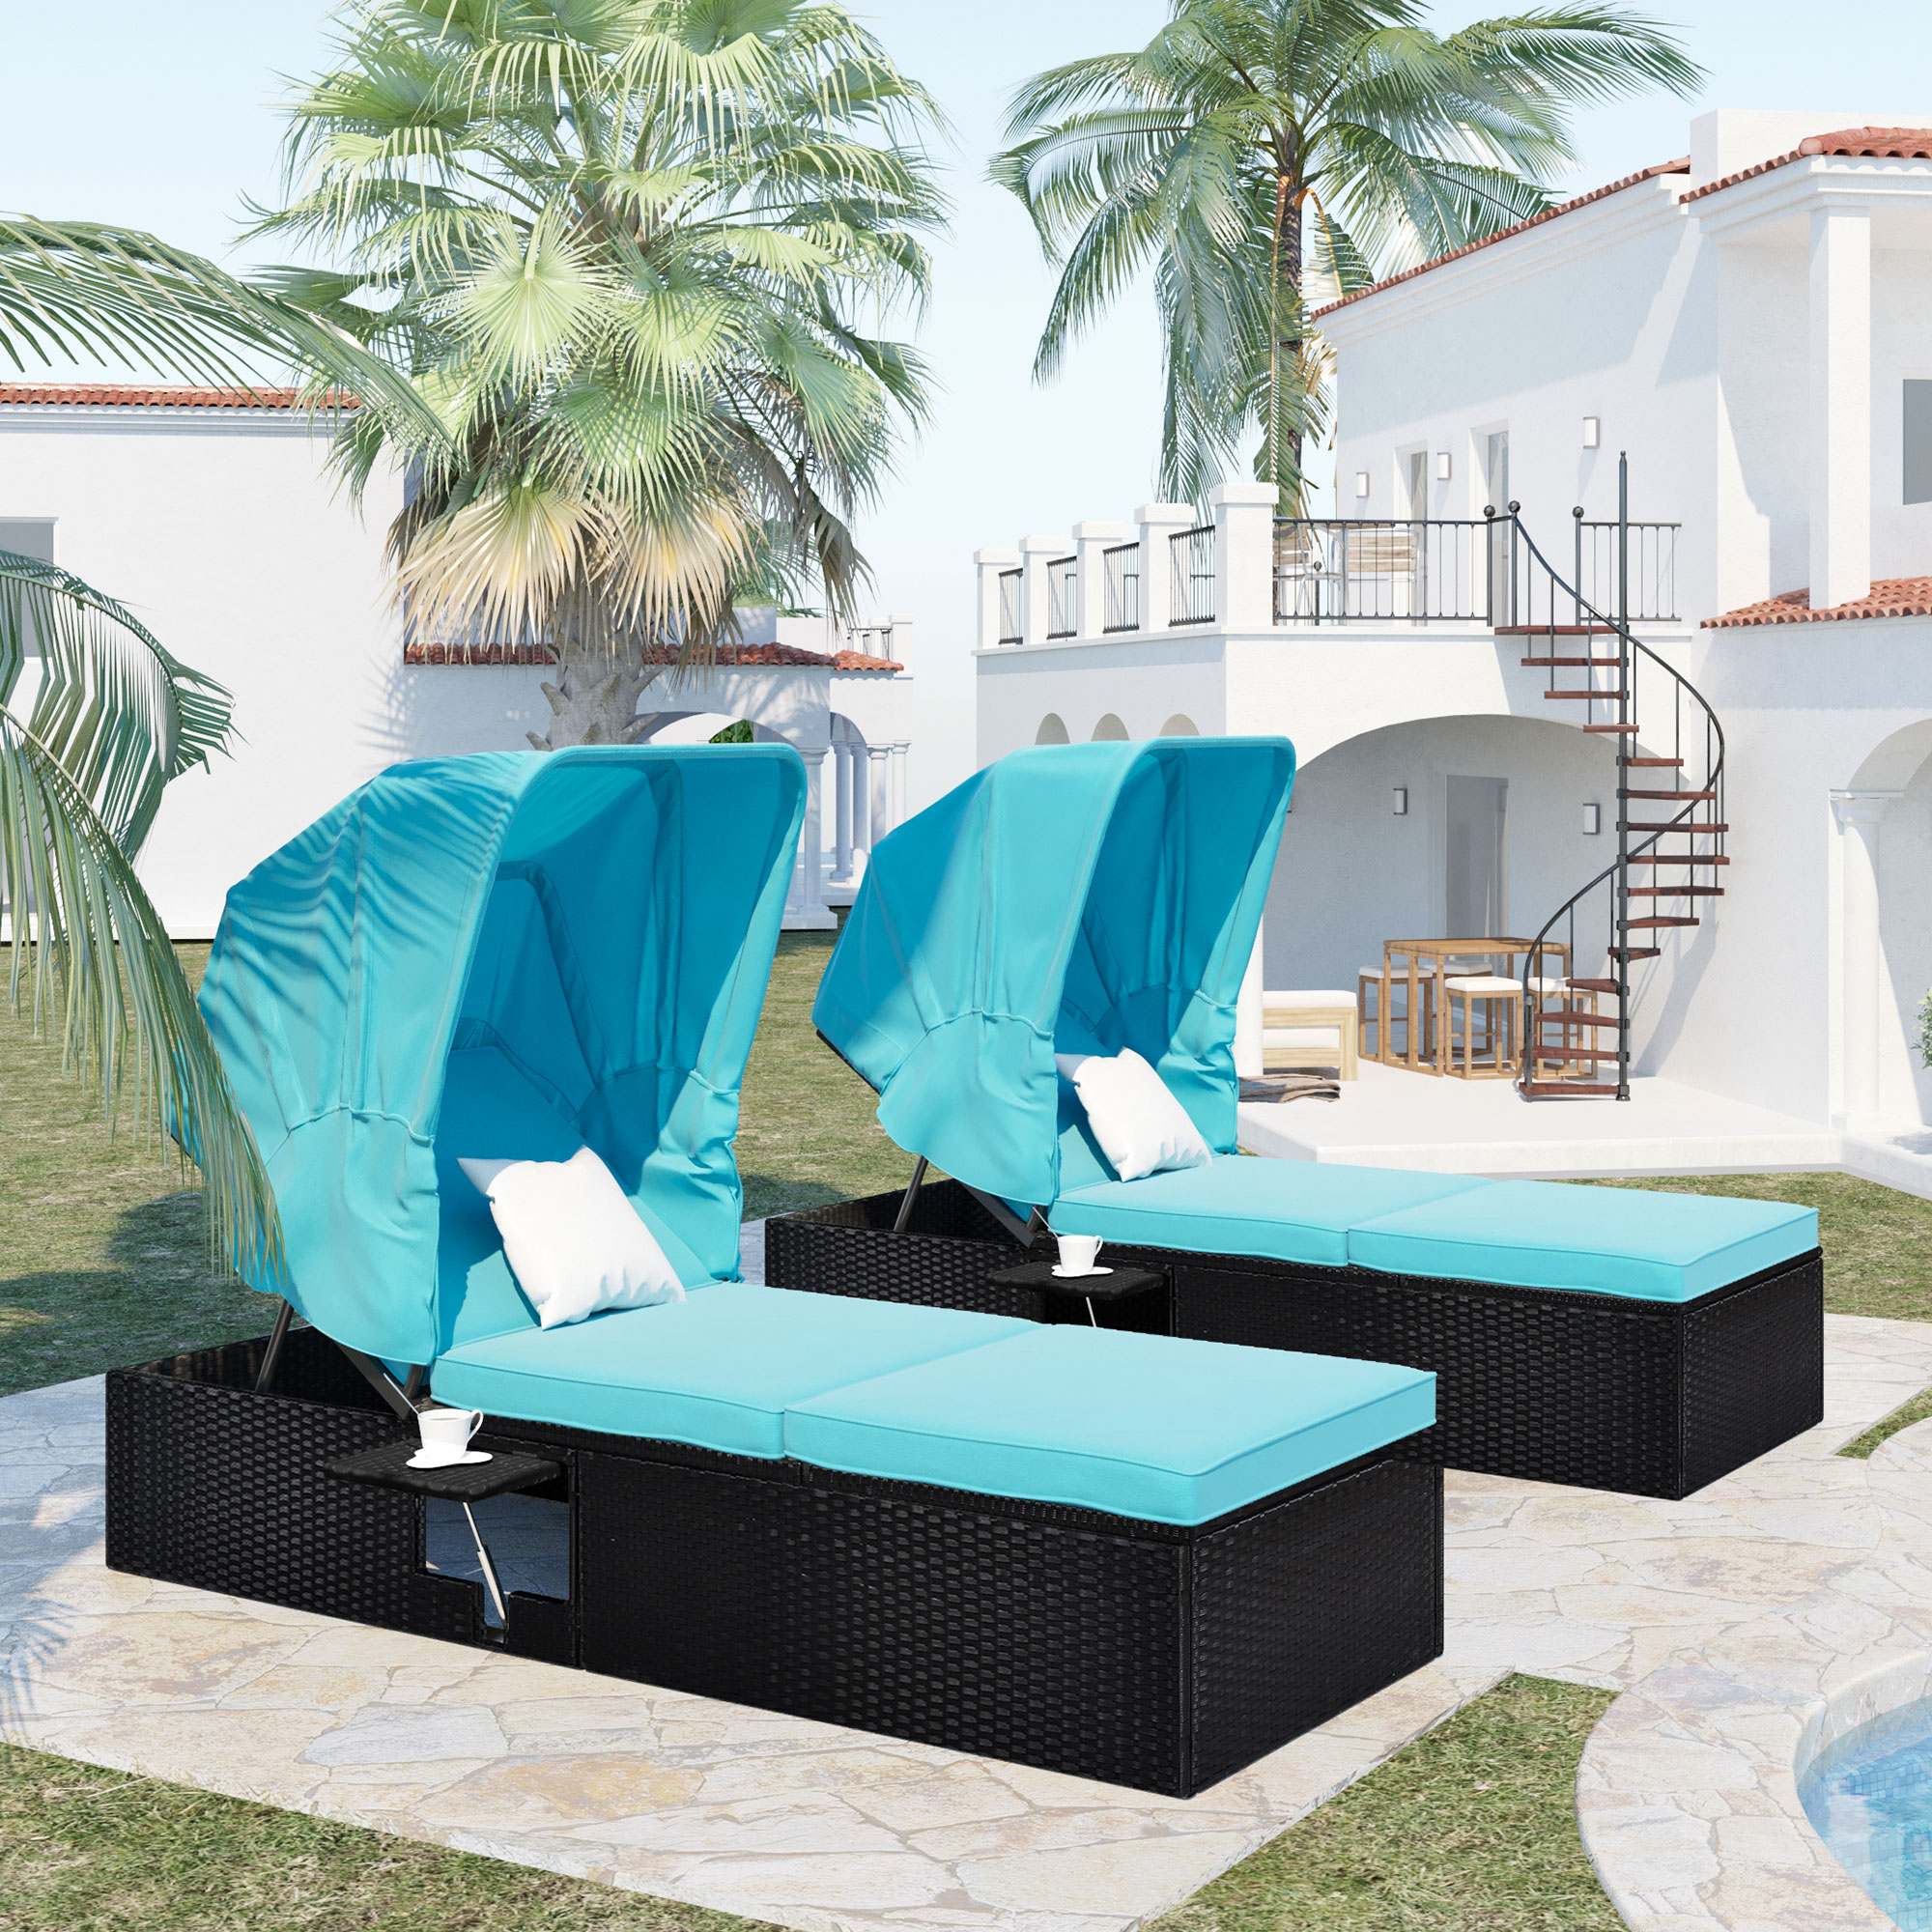 Outdoor Patio PE Wicker Chaise Lounge, 5-Position Adjustable Reclining Lounge Chair, Outdoor Sun Lounger with cushions, Canopy & Cup Table for Patio Poolside Backyard Porch Garden, B29 - image 3 of 10